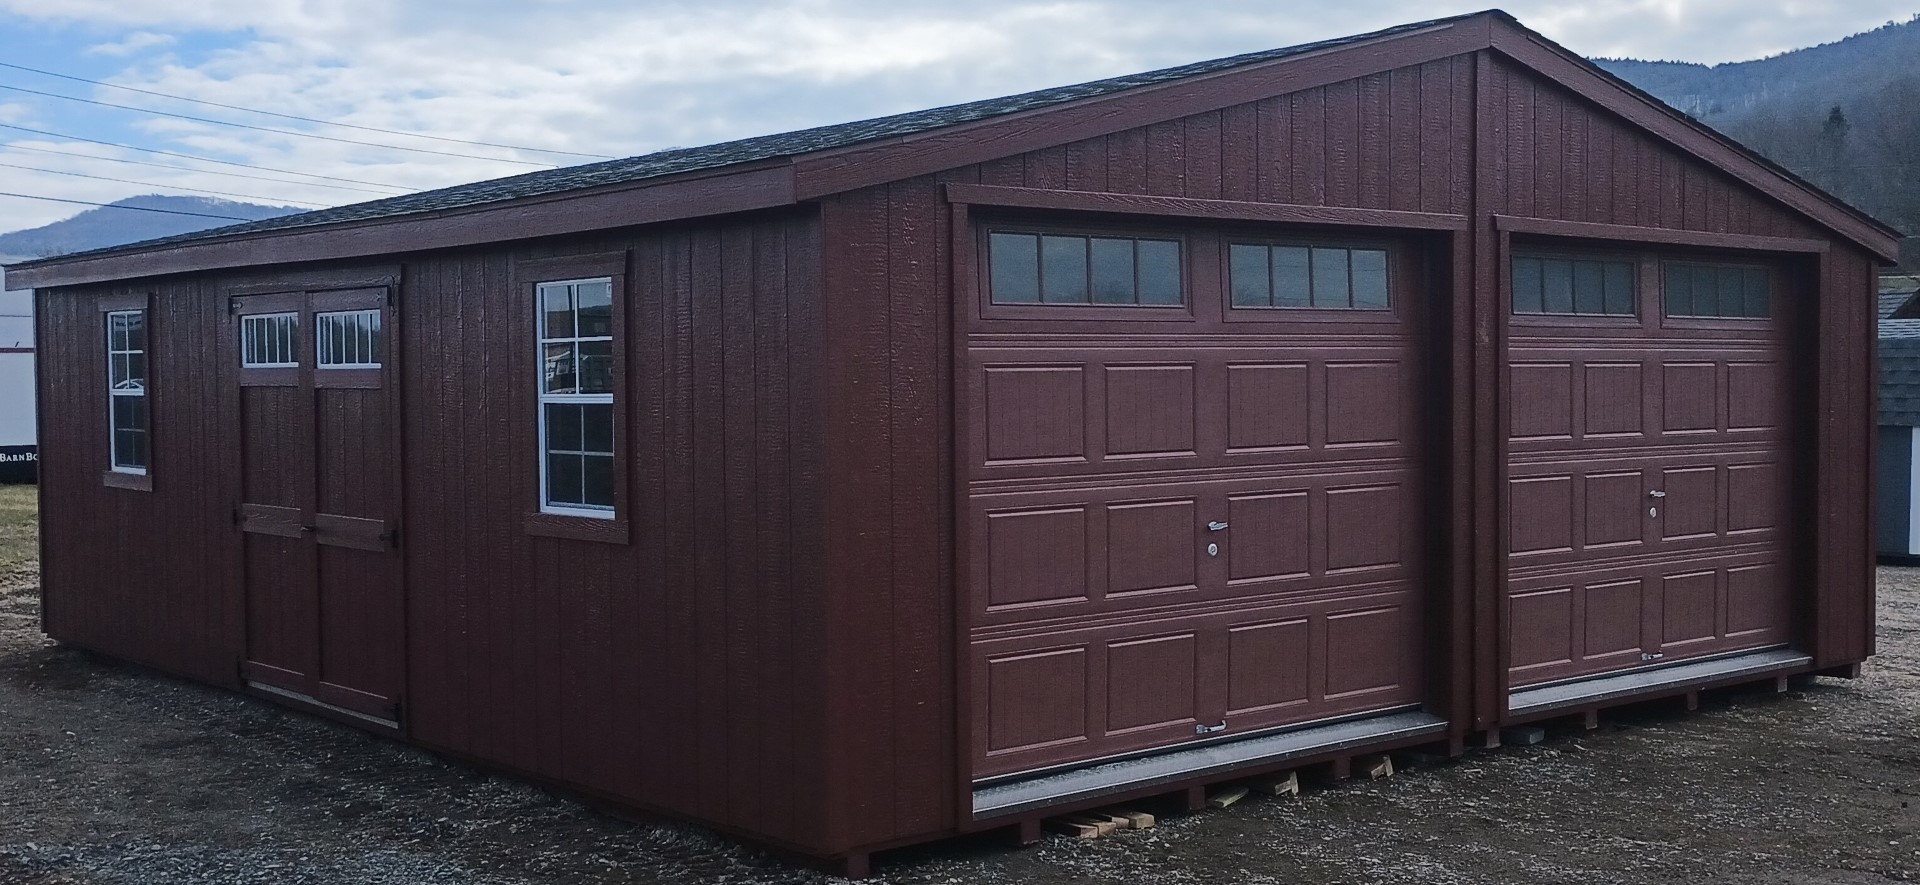 Double garage with red garage doors, windows and a 6' double door on the side